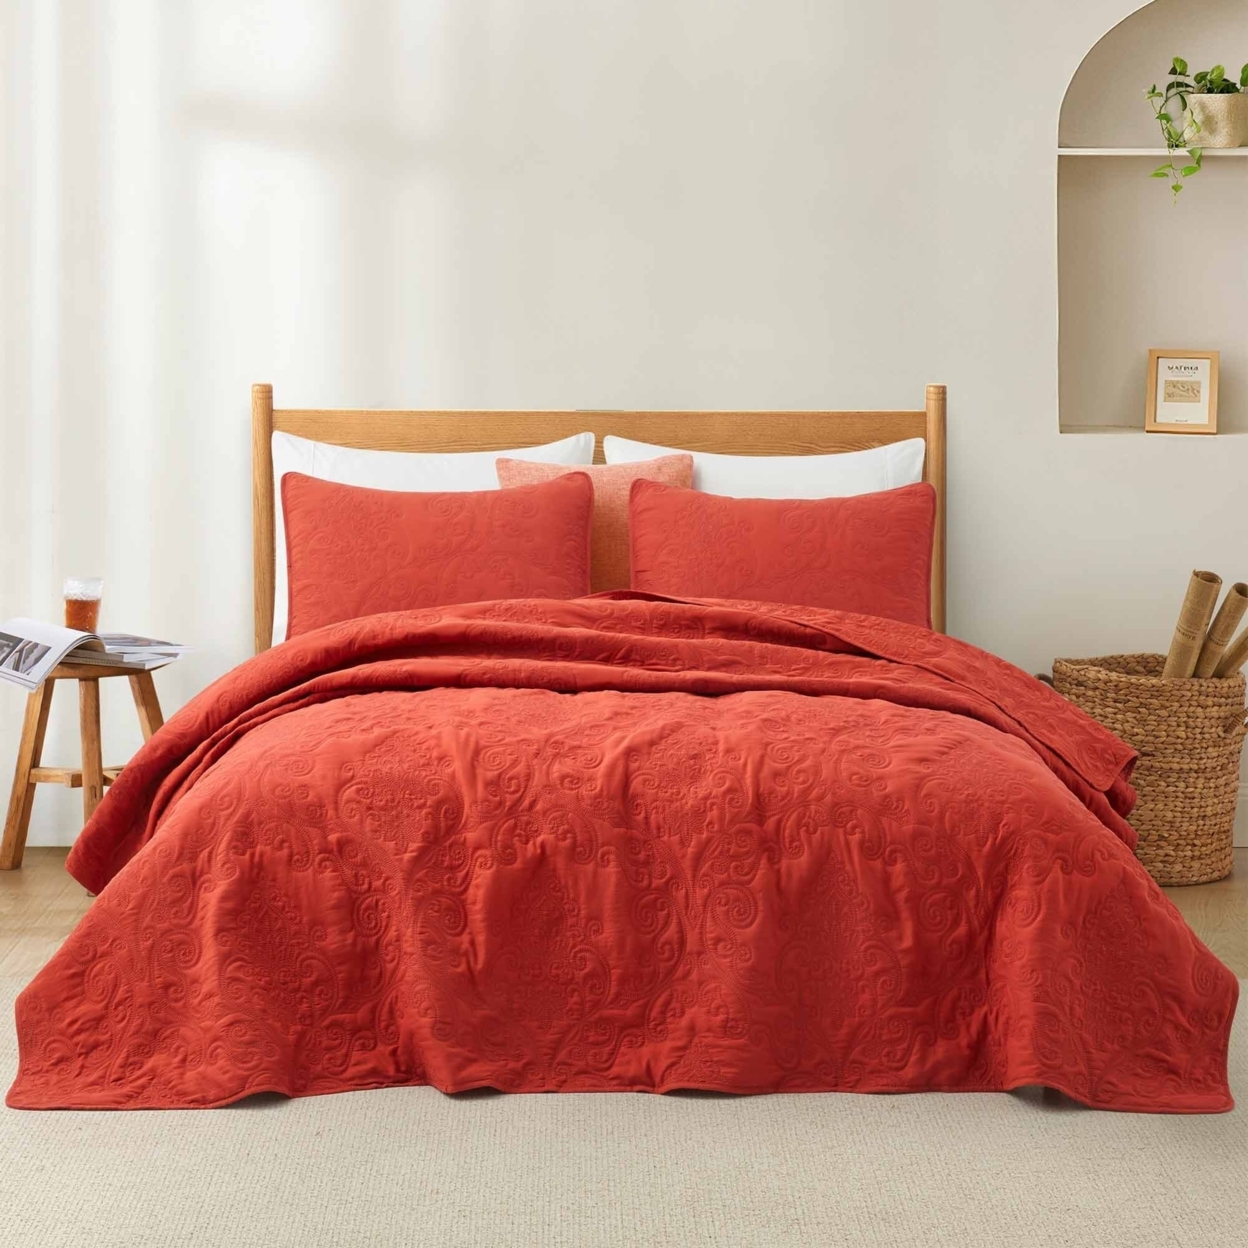 3 Piece Coverlet Set Lightweight Quilt Set With Shams - Red, Twin